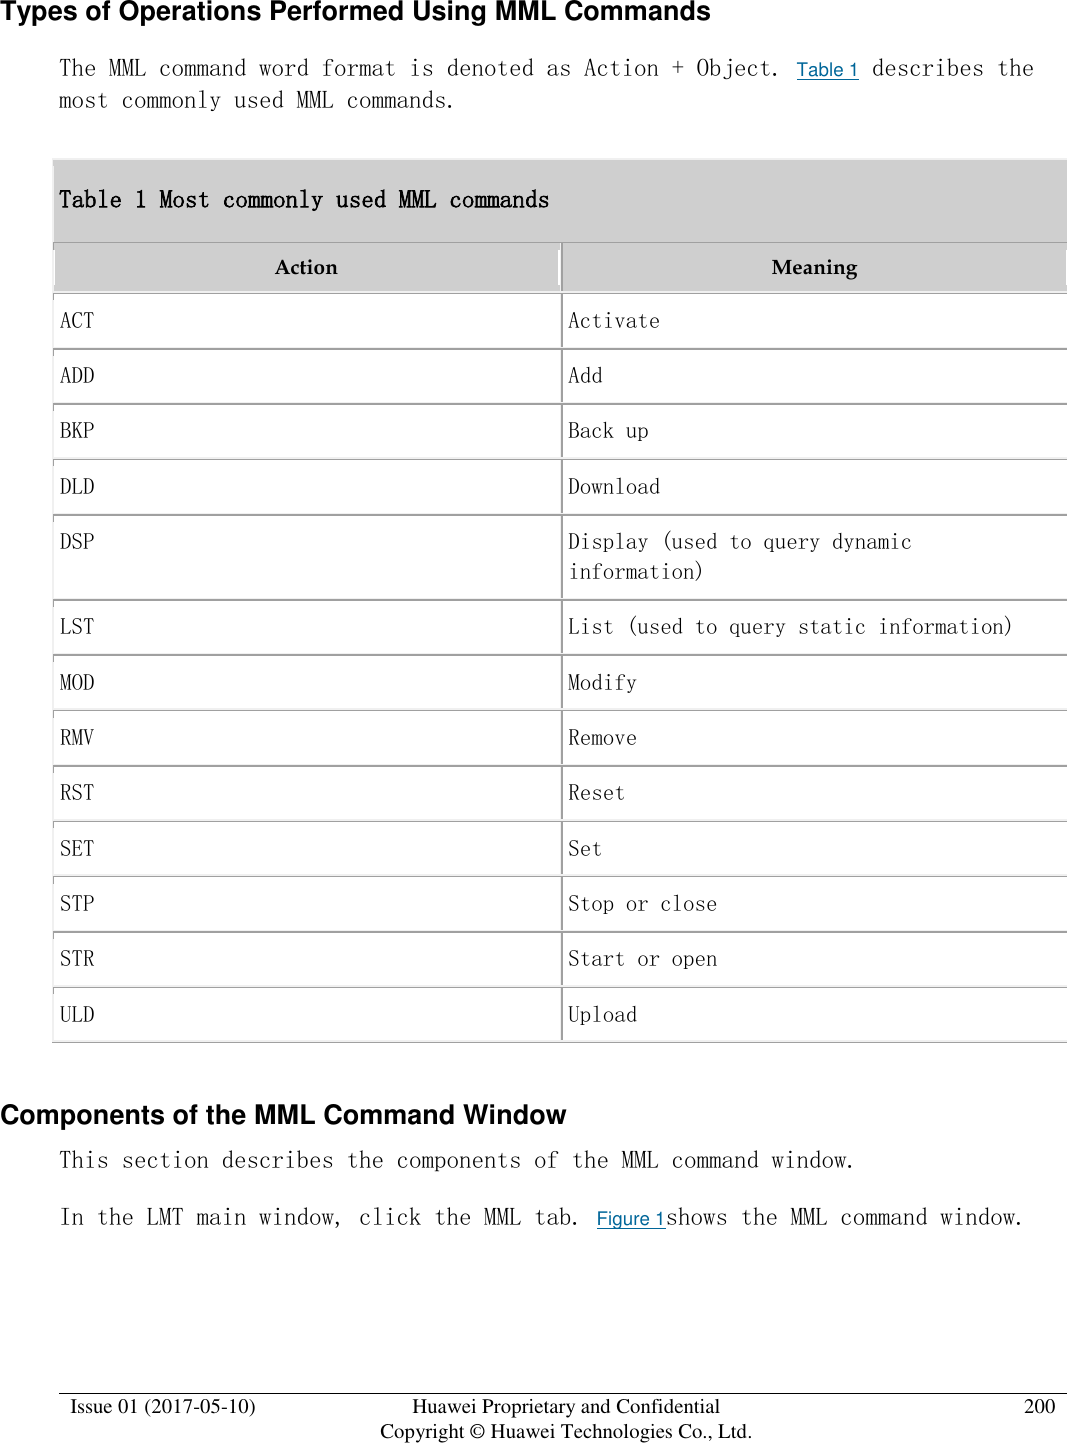  Issue 01 (2017-05-10) Huawei Proprietary and Confidential      Copyright © Huawei Technologies Co., Ltd. 200  Types of Operations Performed Using MML Commands The MML command word format is denoted as Action + Object. Table 1 describes the most commonly used MML commands.  Table 1 Most commonly used MML commands Action Meaning ACT Activate ADD Add BKP Back up DLD Download DSP Display (used to query dynamic information) LST List (used to query static information) MOD Modify RMV Remove RST Reset SET Set STP Stop or close STR Start or open ULD Upload Components of the MML Command Window This section describes the components of the MML command window.  In the LMT main window, click the MML tab. Figure 1shows the MML command window.  